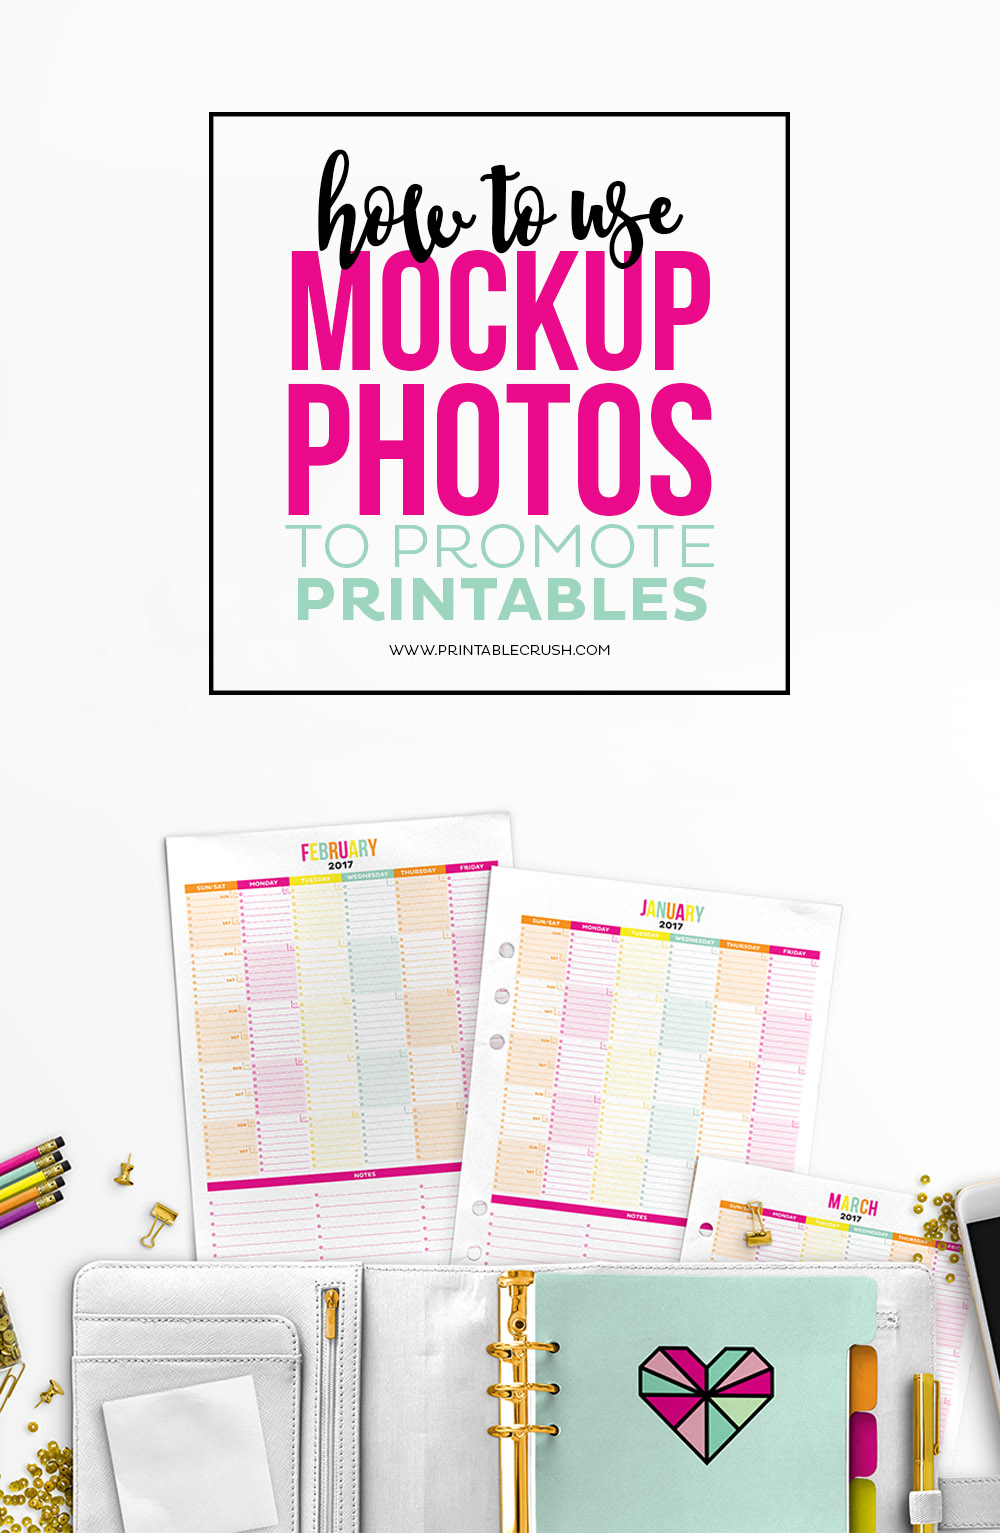 http://printablecrush.com/wp-content/uploads/2017/03/how-to-edit-mockup-photos-to-promote-printables.jpg